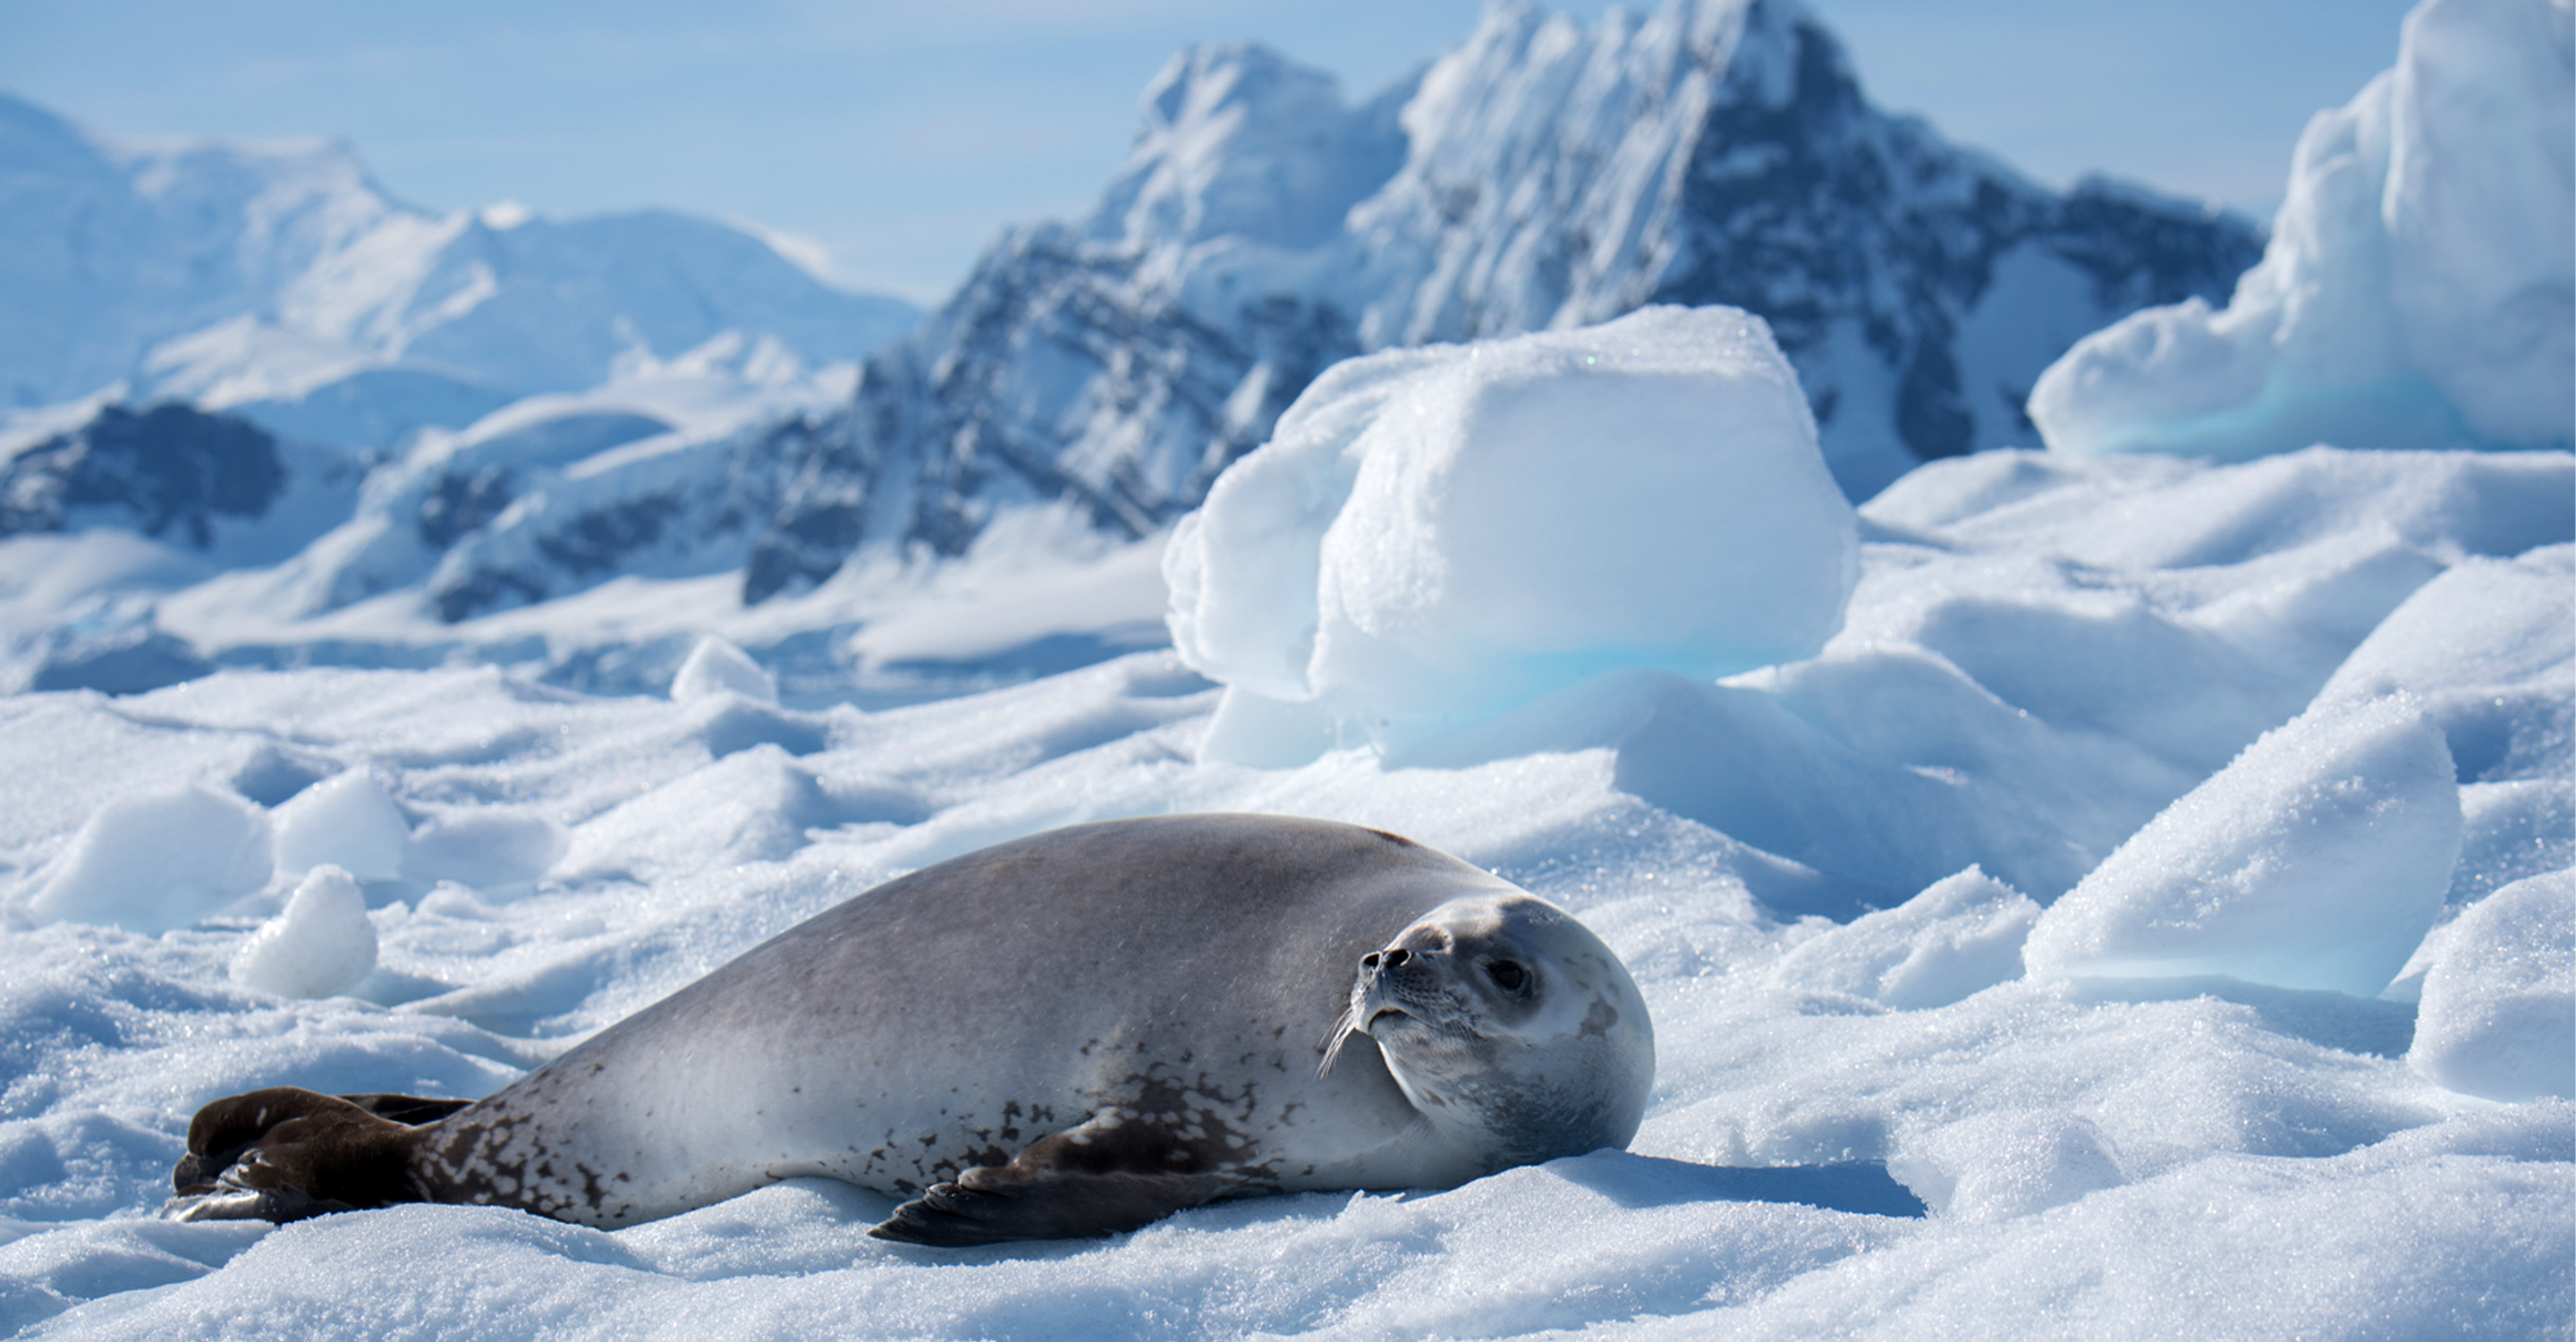 A Weddell seal lies on the snow in Antarctica